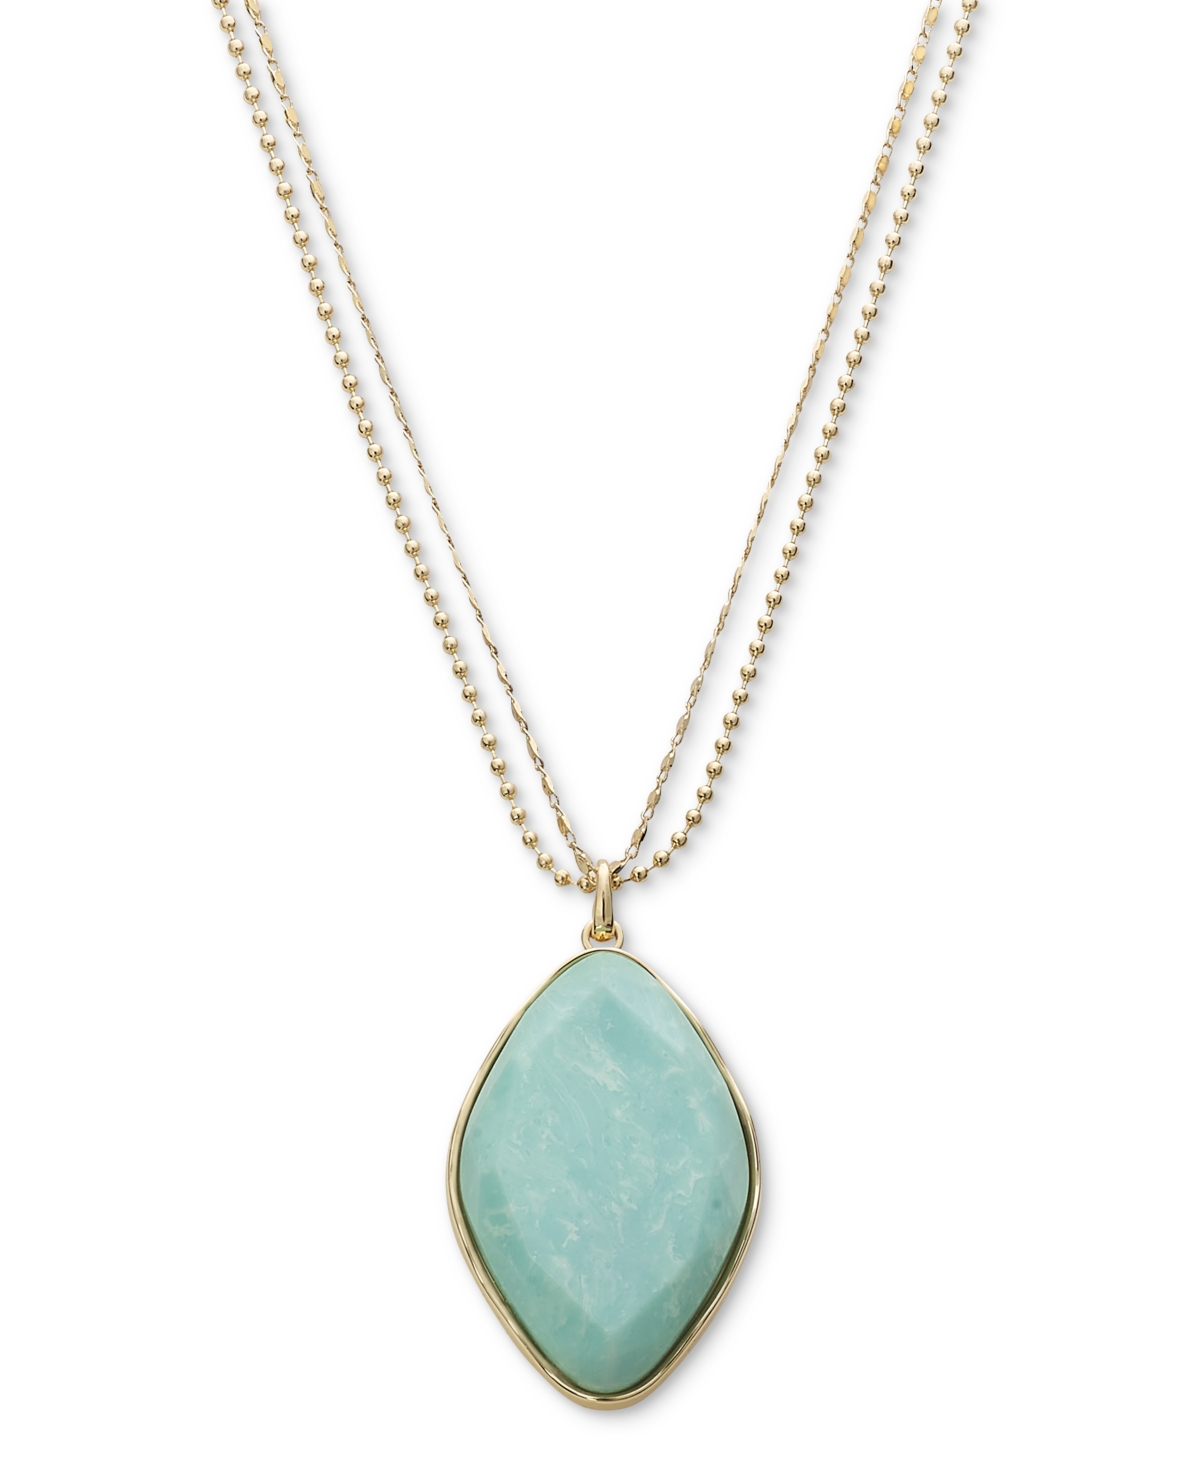 Gold-Tone Stone Pendant Necklace, 38" + 3" extender, Created for Macy's - Green